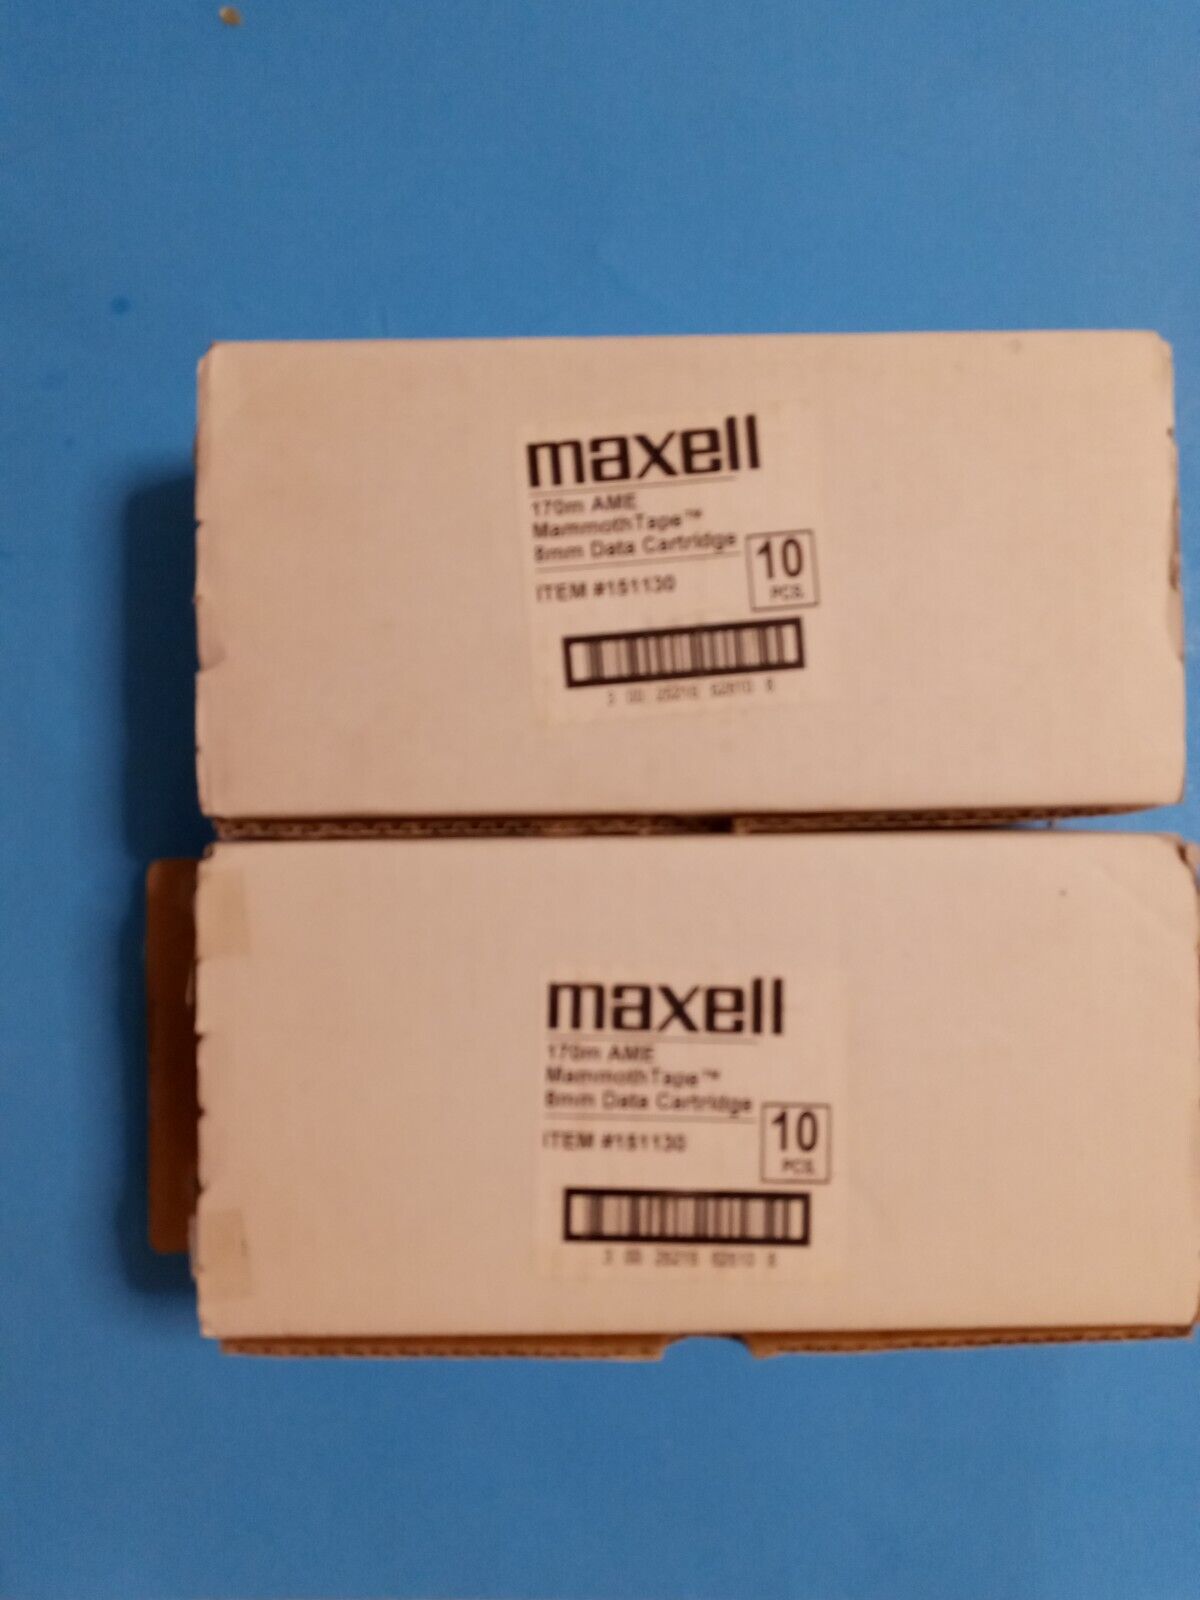 20 MAXELL 170m AME Mammoth 8mm 20GB Data tape Cartridges P/N 151130 NEW